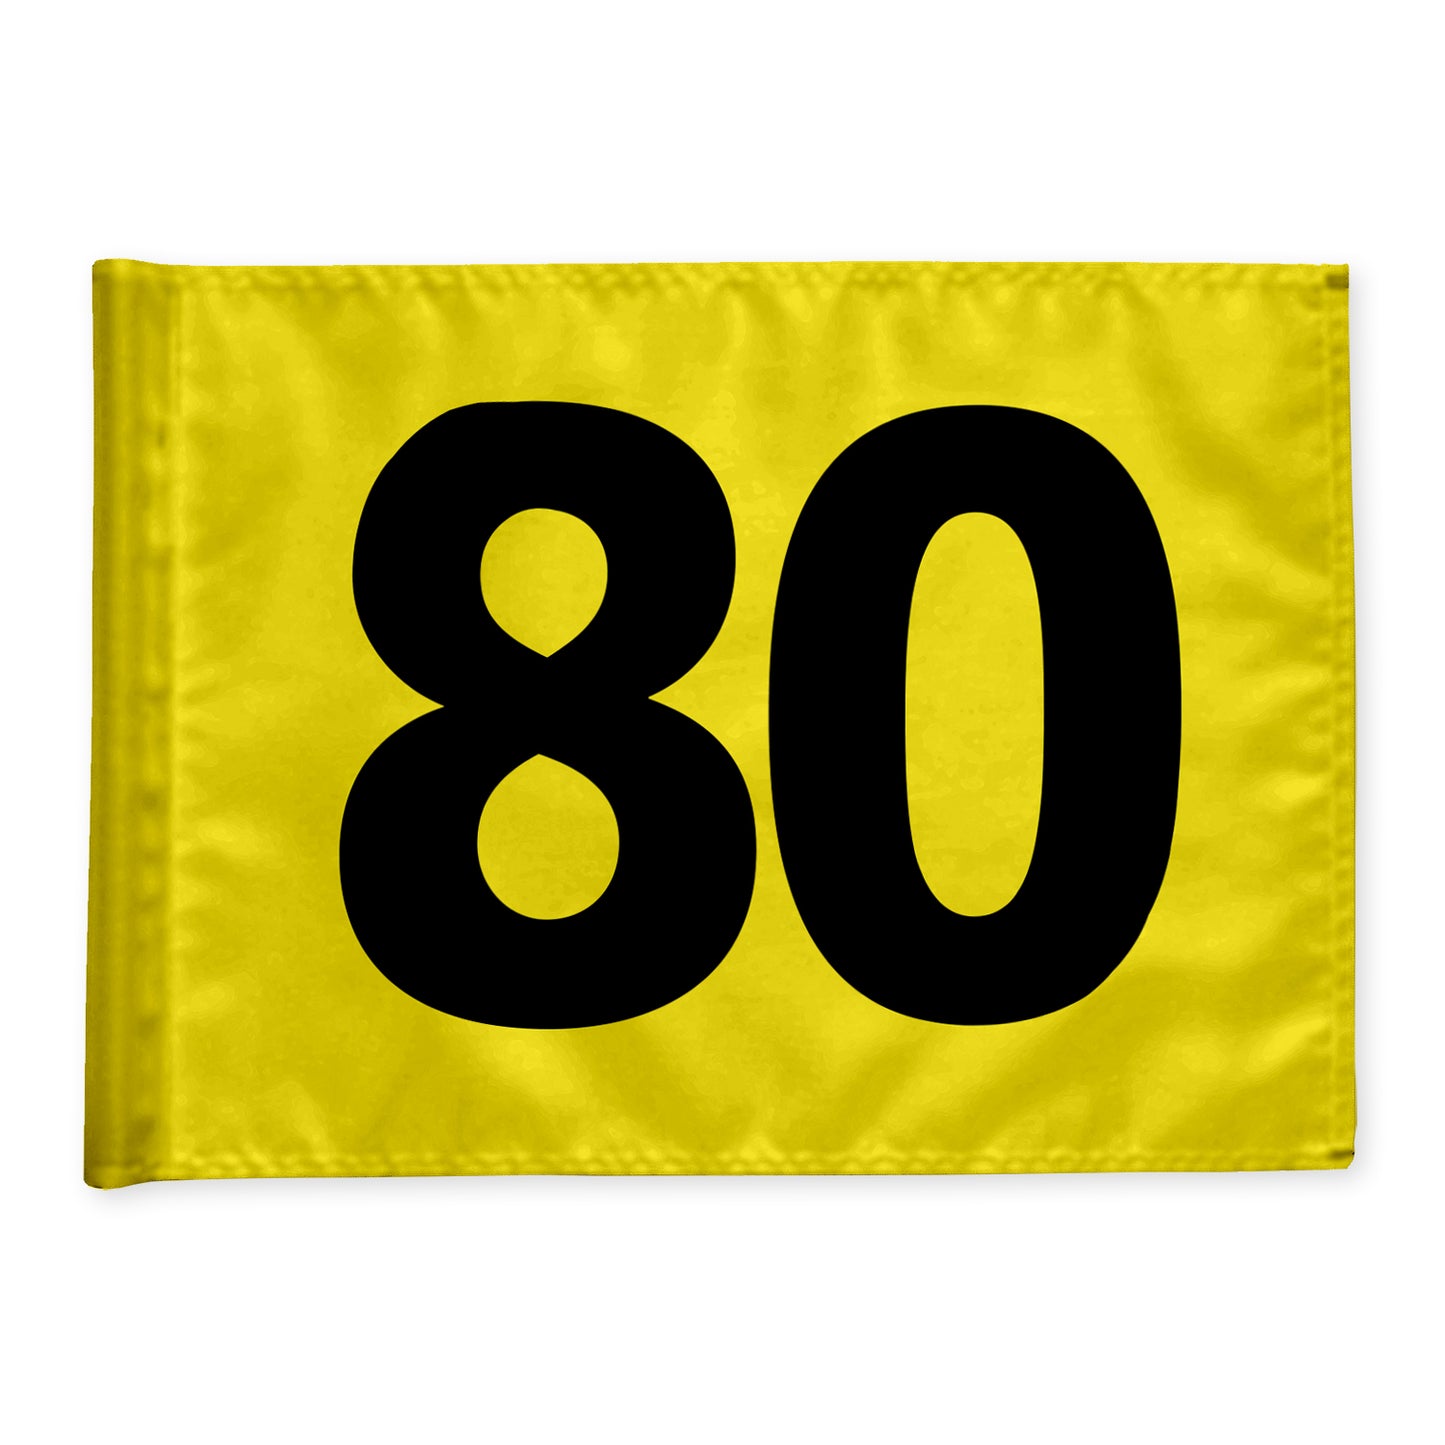 Driving range distance marker flag 80 m, yellow with black digits, double 115 gram fabric